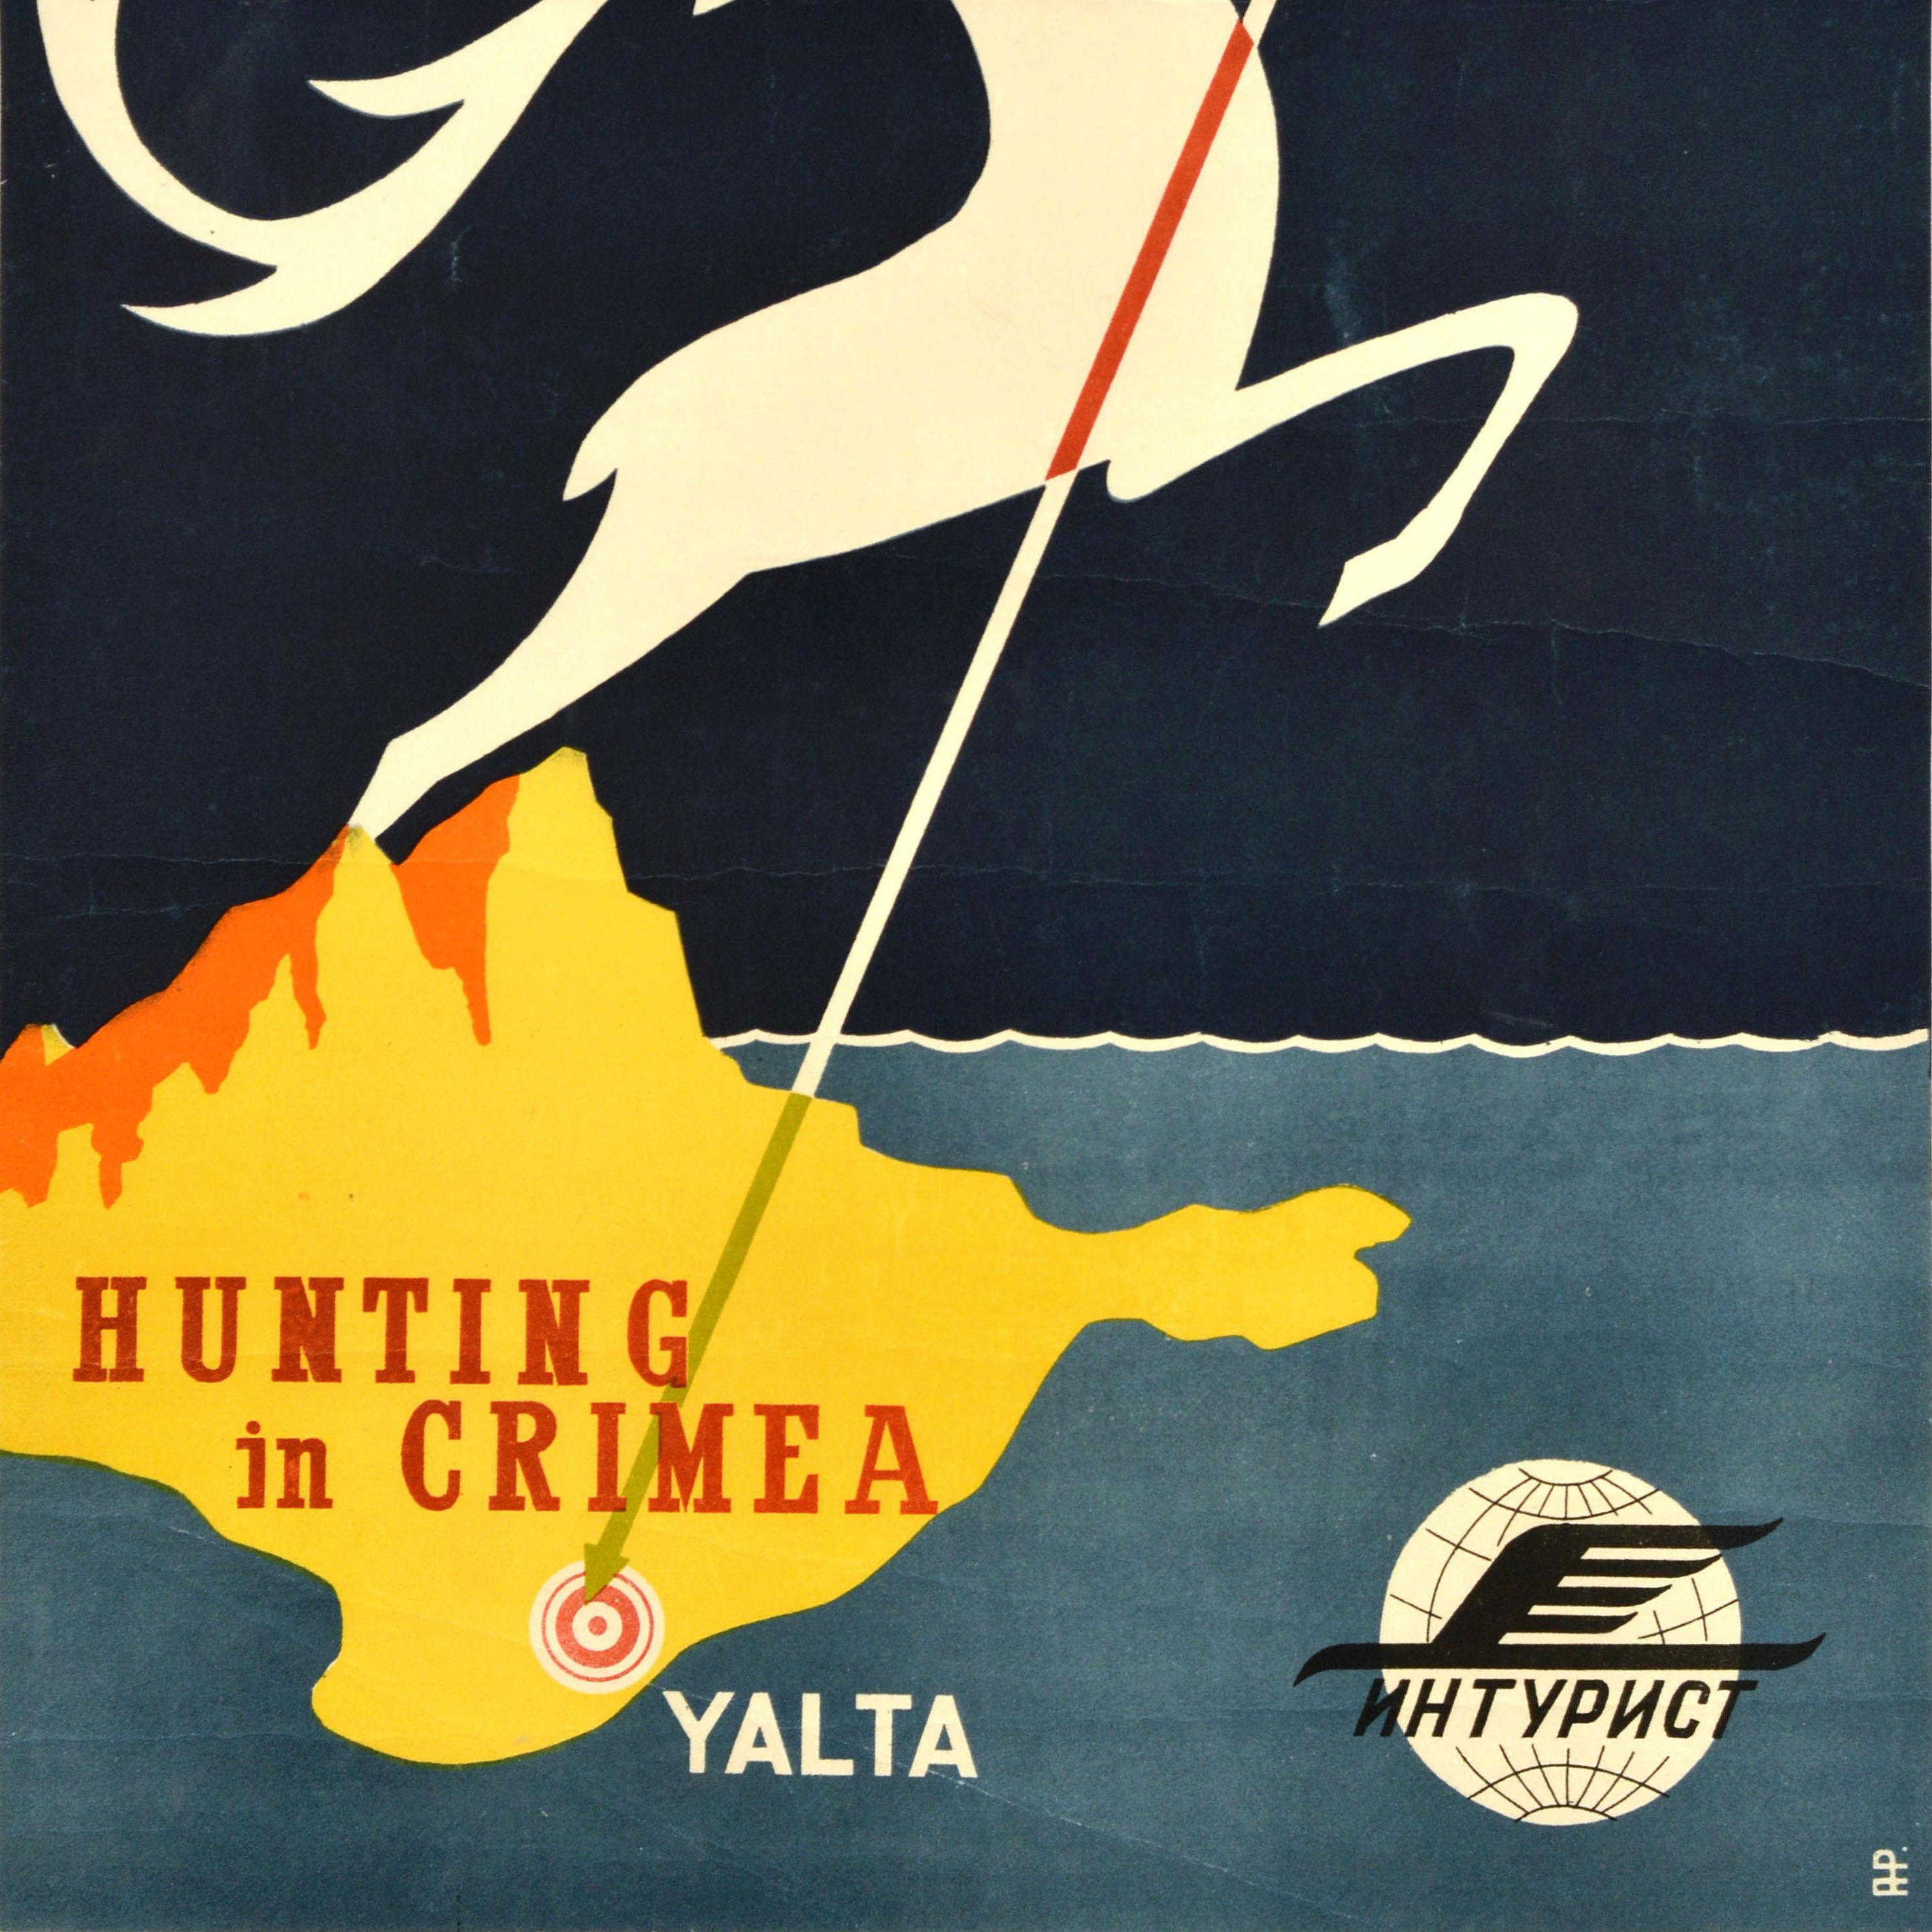 Original vintage Soviet Intourist travel advertising poster - Hunting in Crimea Yalta - featuring a colourful arrow pointing down at the holiday resort city of Yalta on the Black Sea with the shape in white of a deer leaping from the Crimean